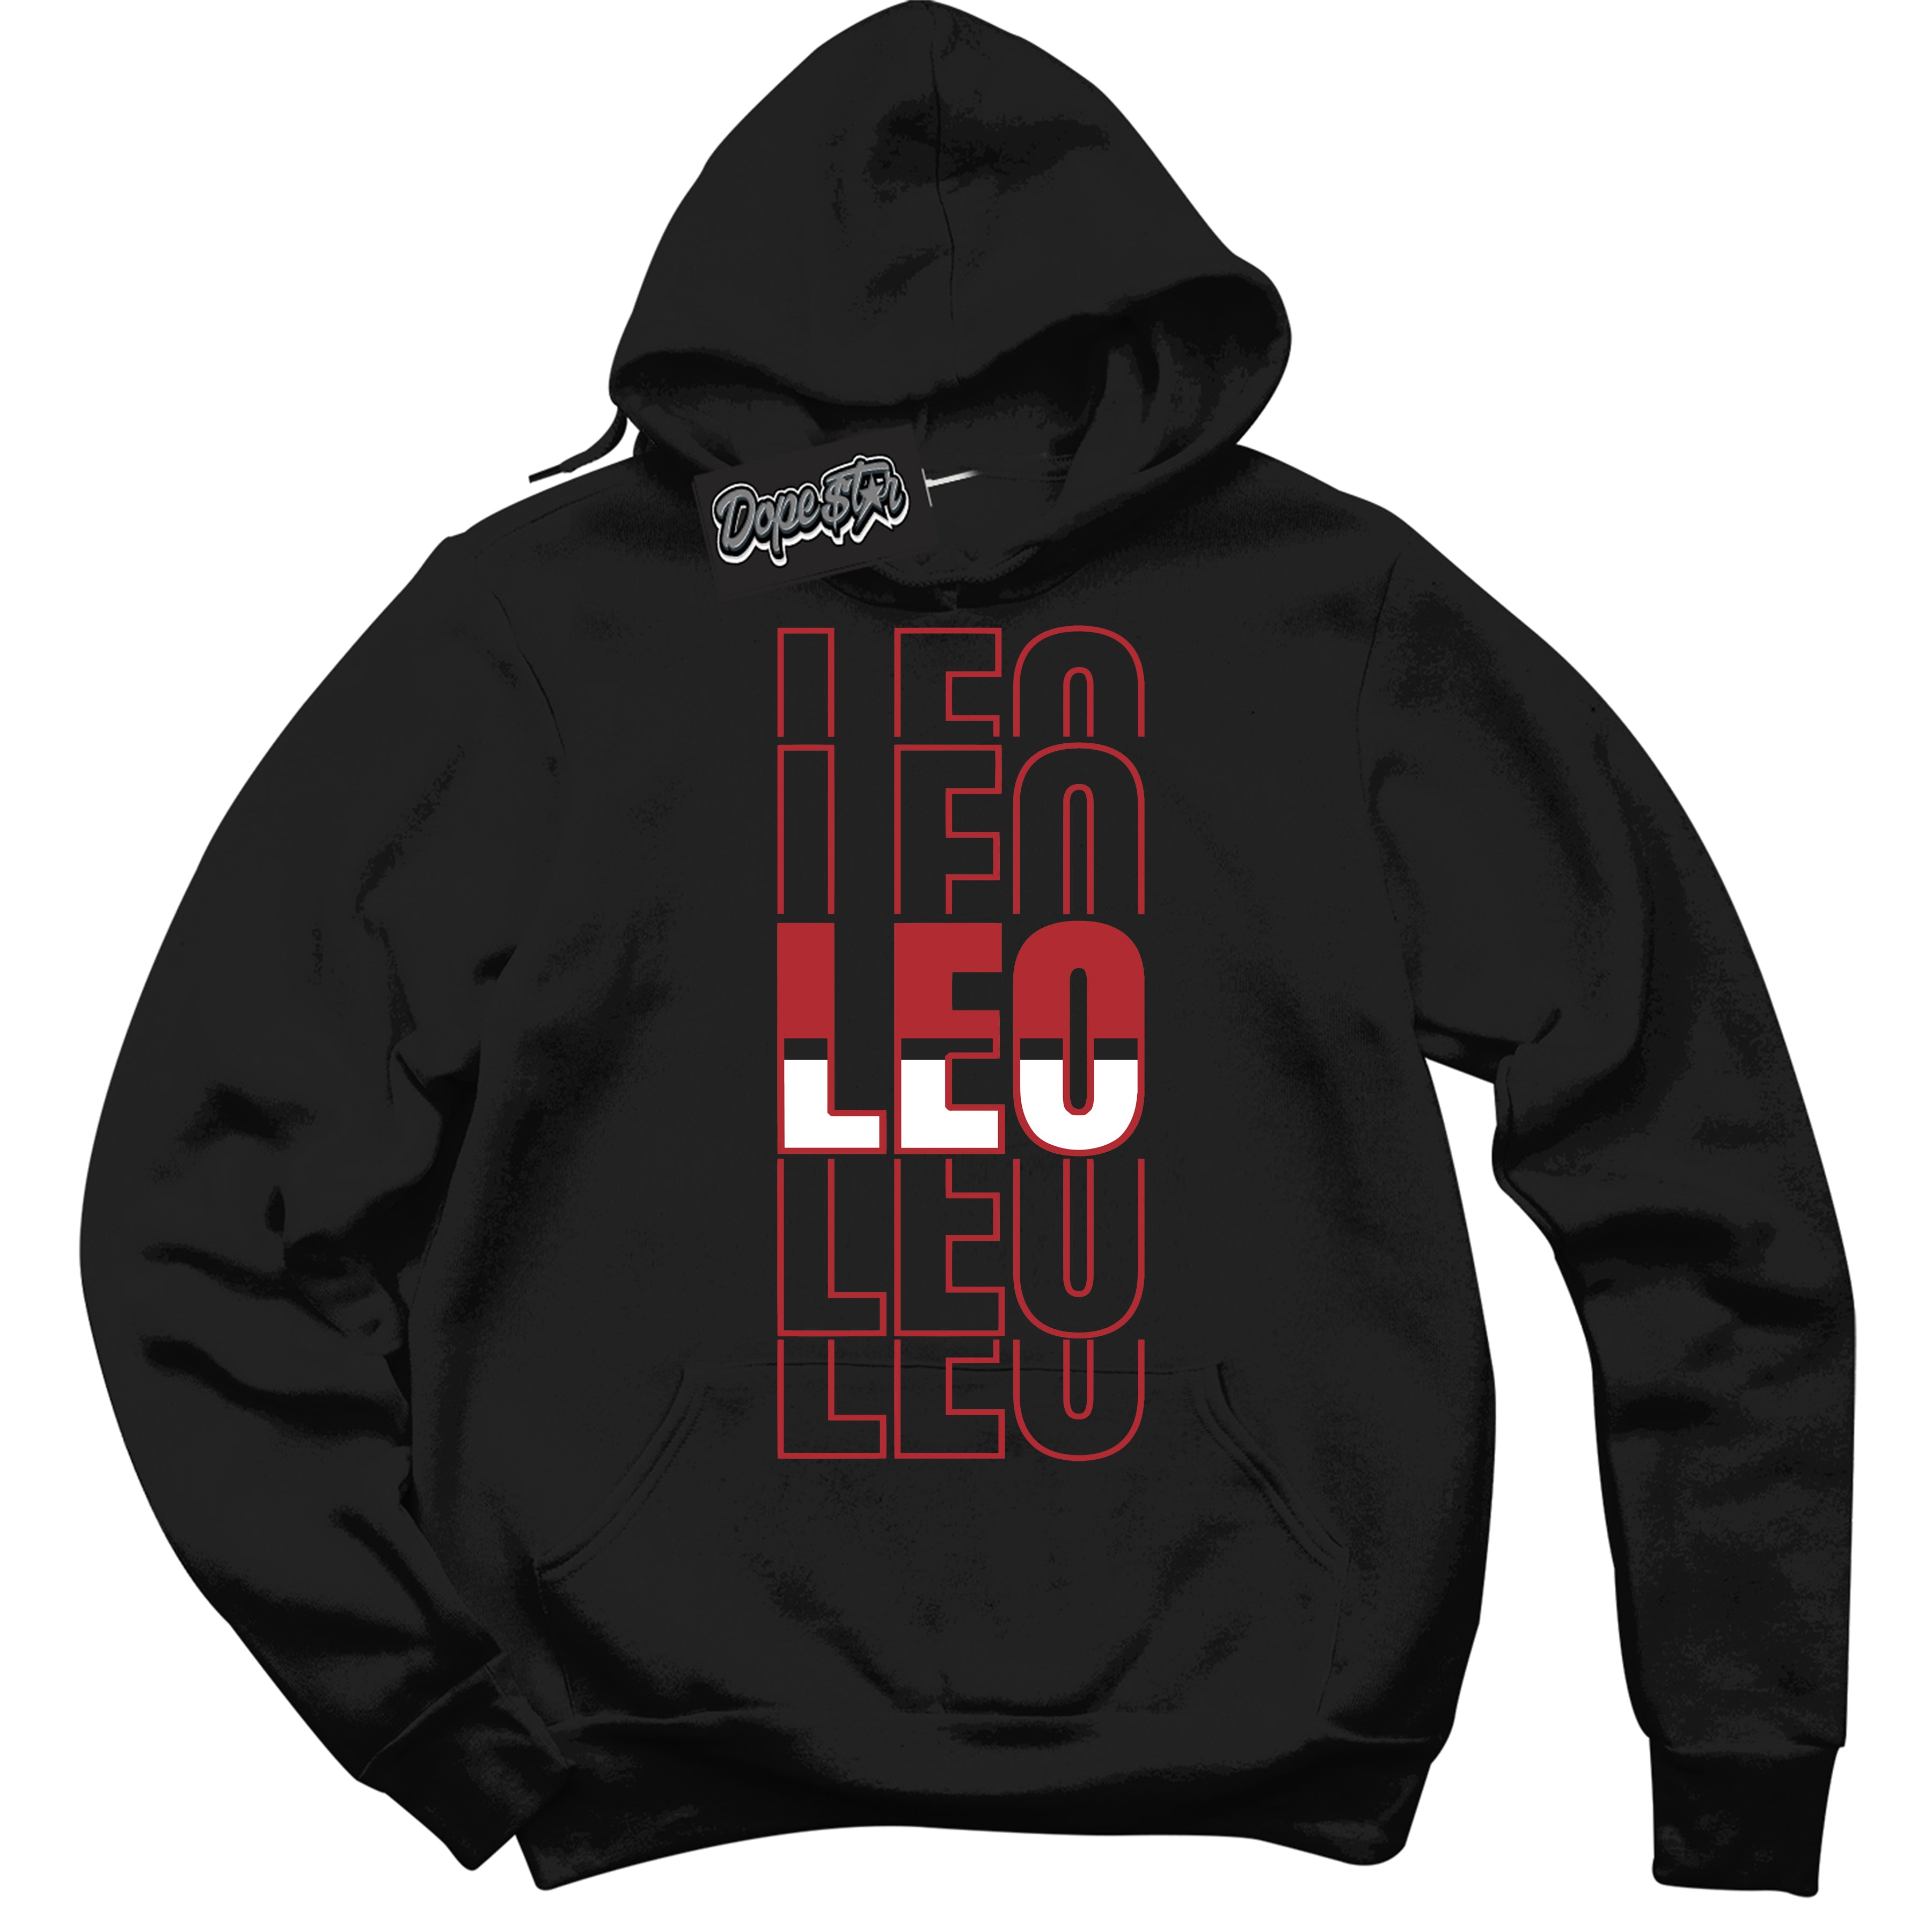 Cool Black Hoodie With “ Leo “ Design That Perfectly Matches Lost And Found 1s Sneakers